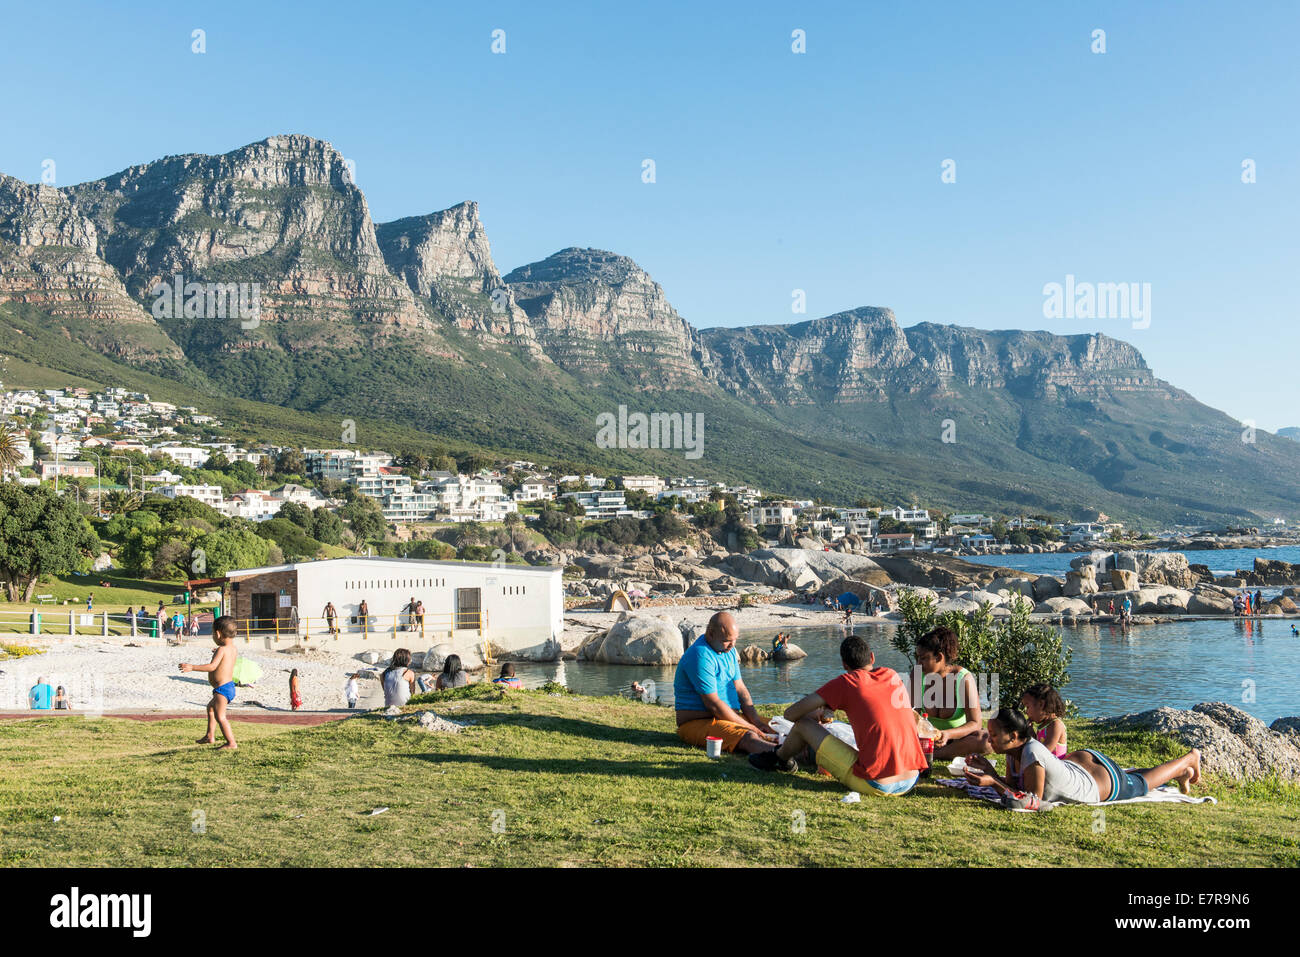 A family enjoys a picnic at Camps Bay, Cape Town, South Africa Stock Photo